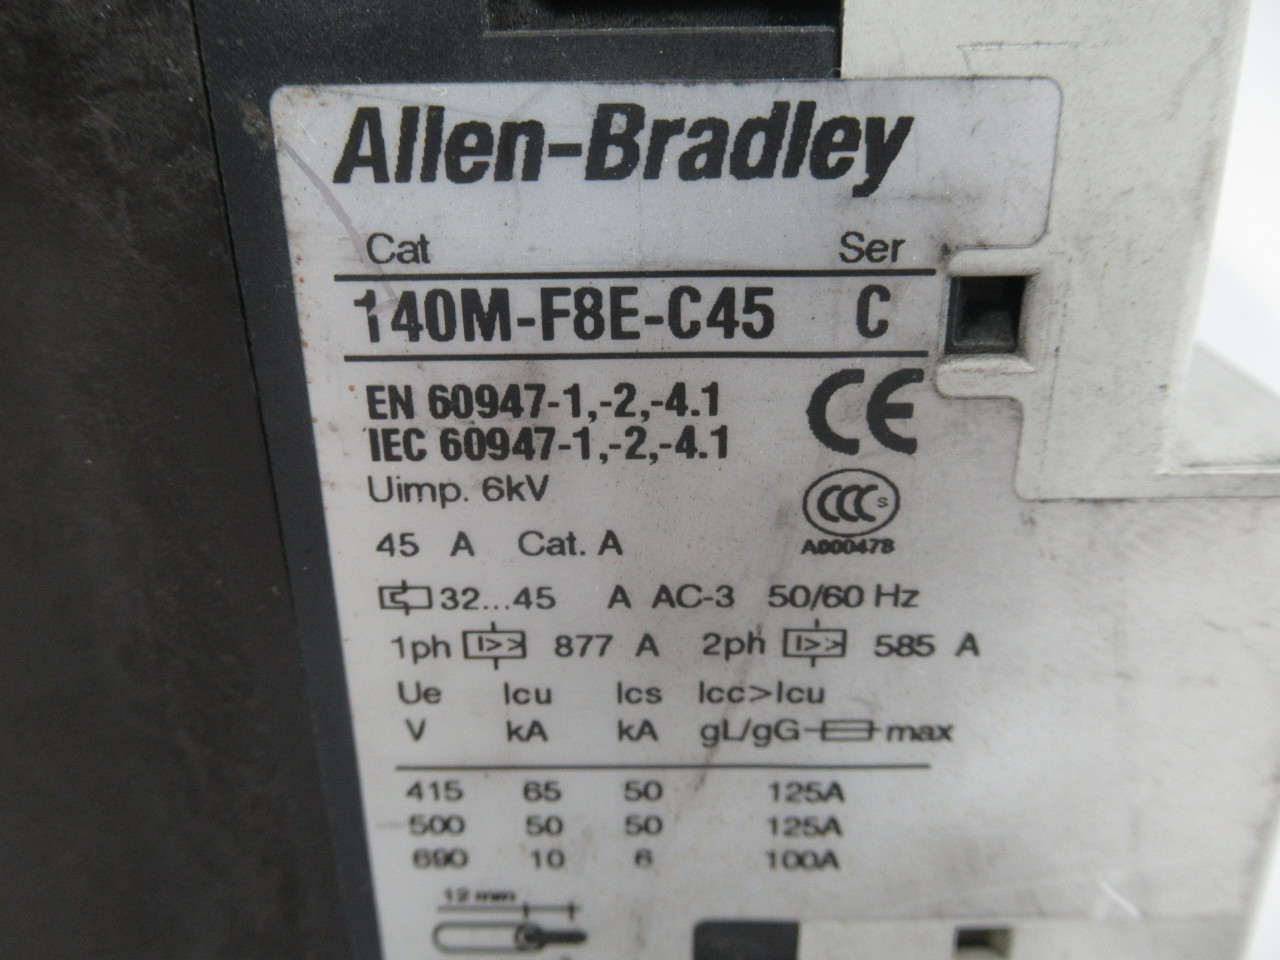 Allen-Bradley 140M-F8E-C45 Ser.C Old Style Motor Protector 32-45A 600VAC USED